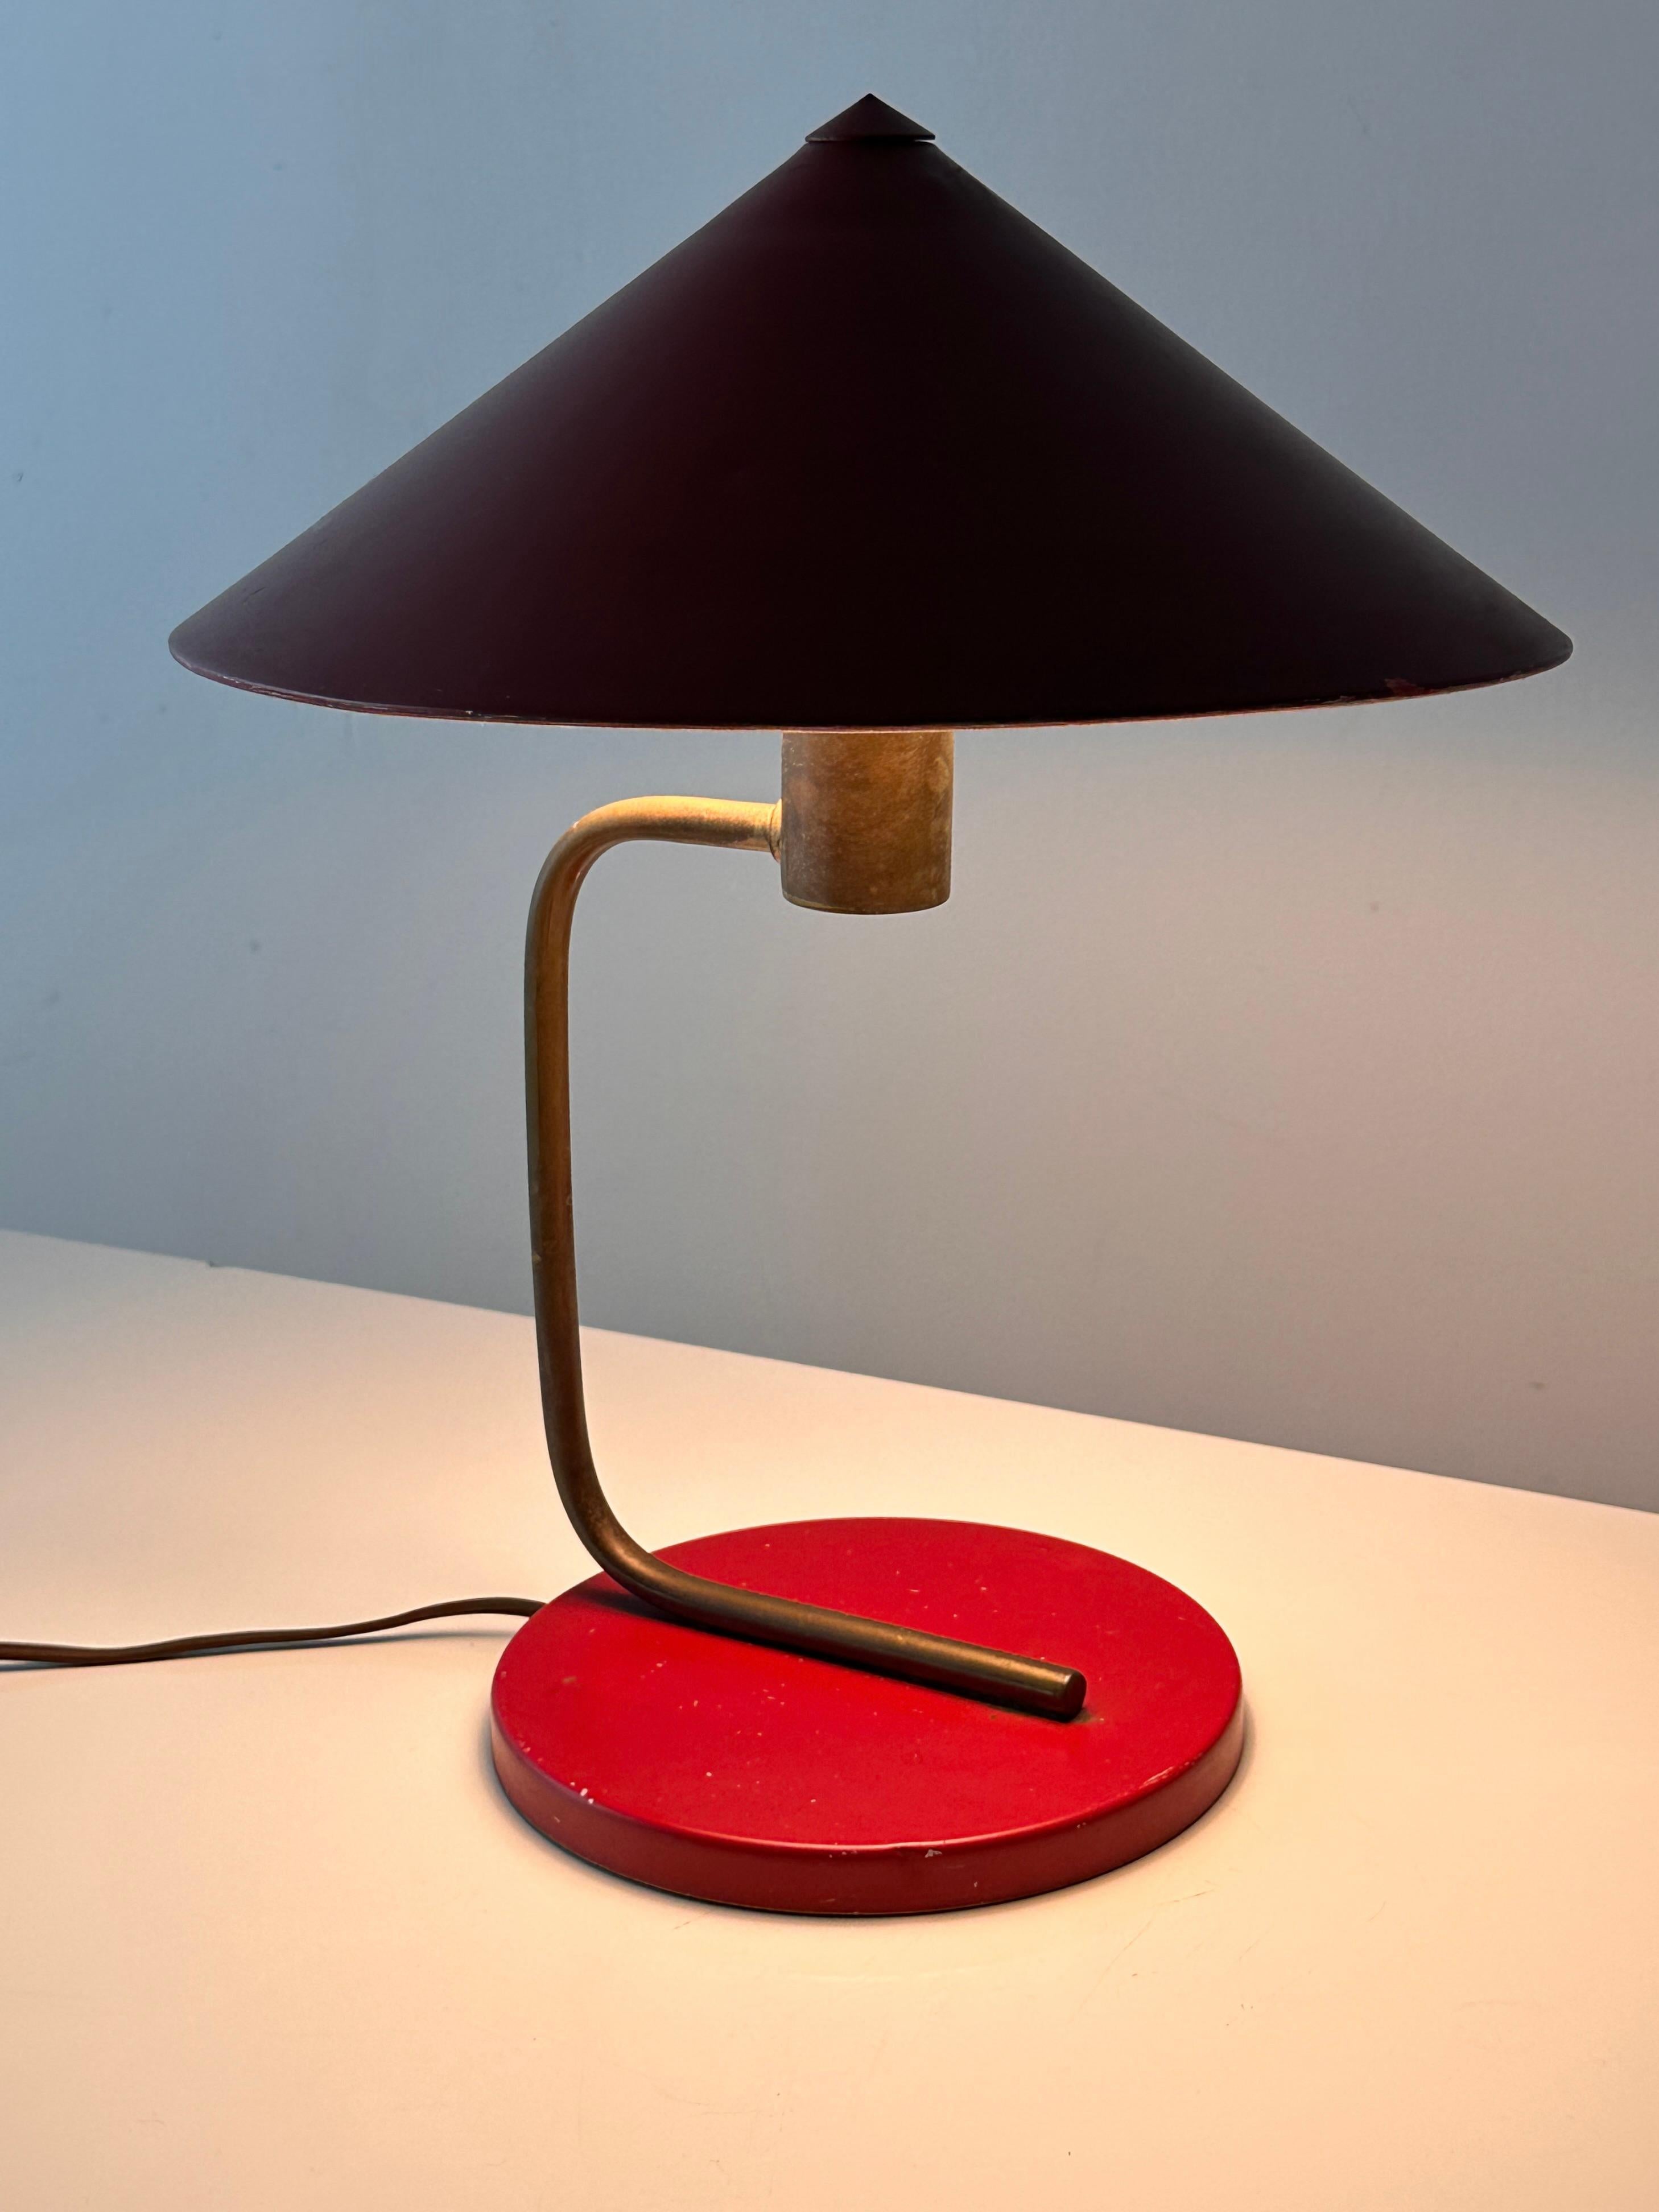 Mid-20th Century Walter Von Nessen Red Enamel and Brass Table Lamp 1930s Art Deco For Sale